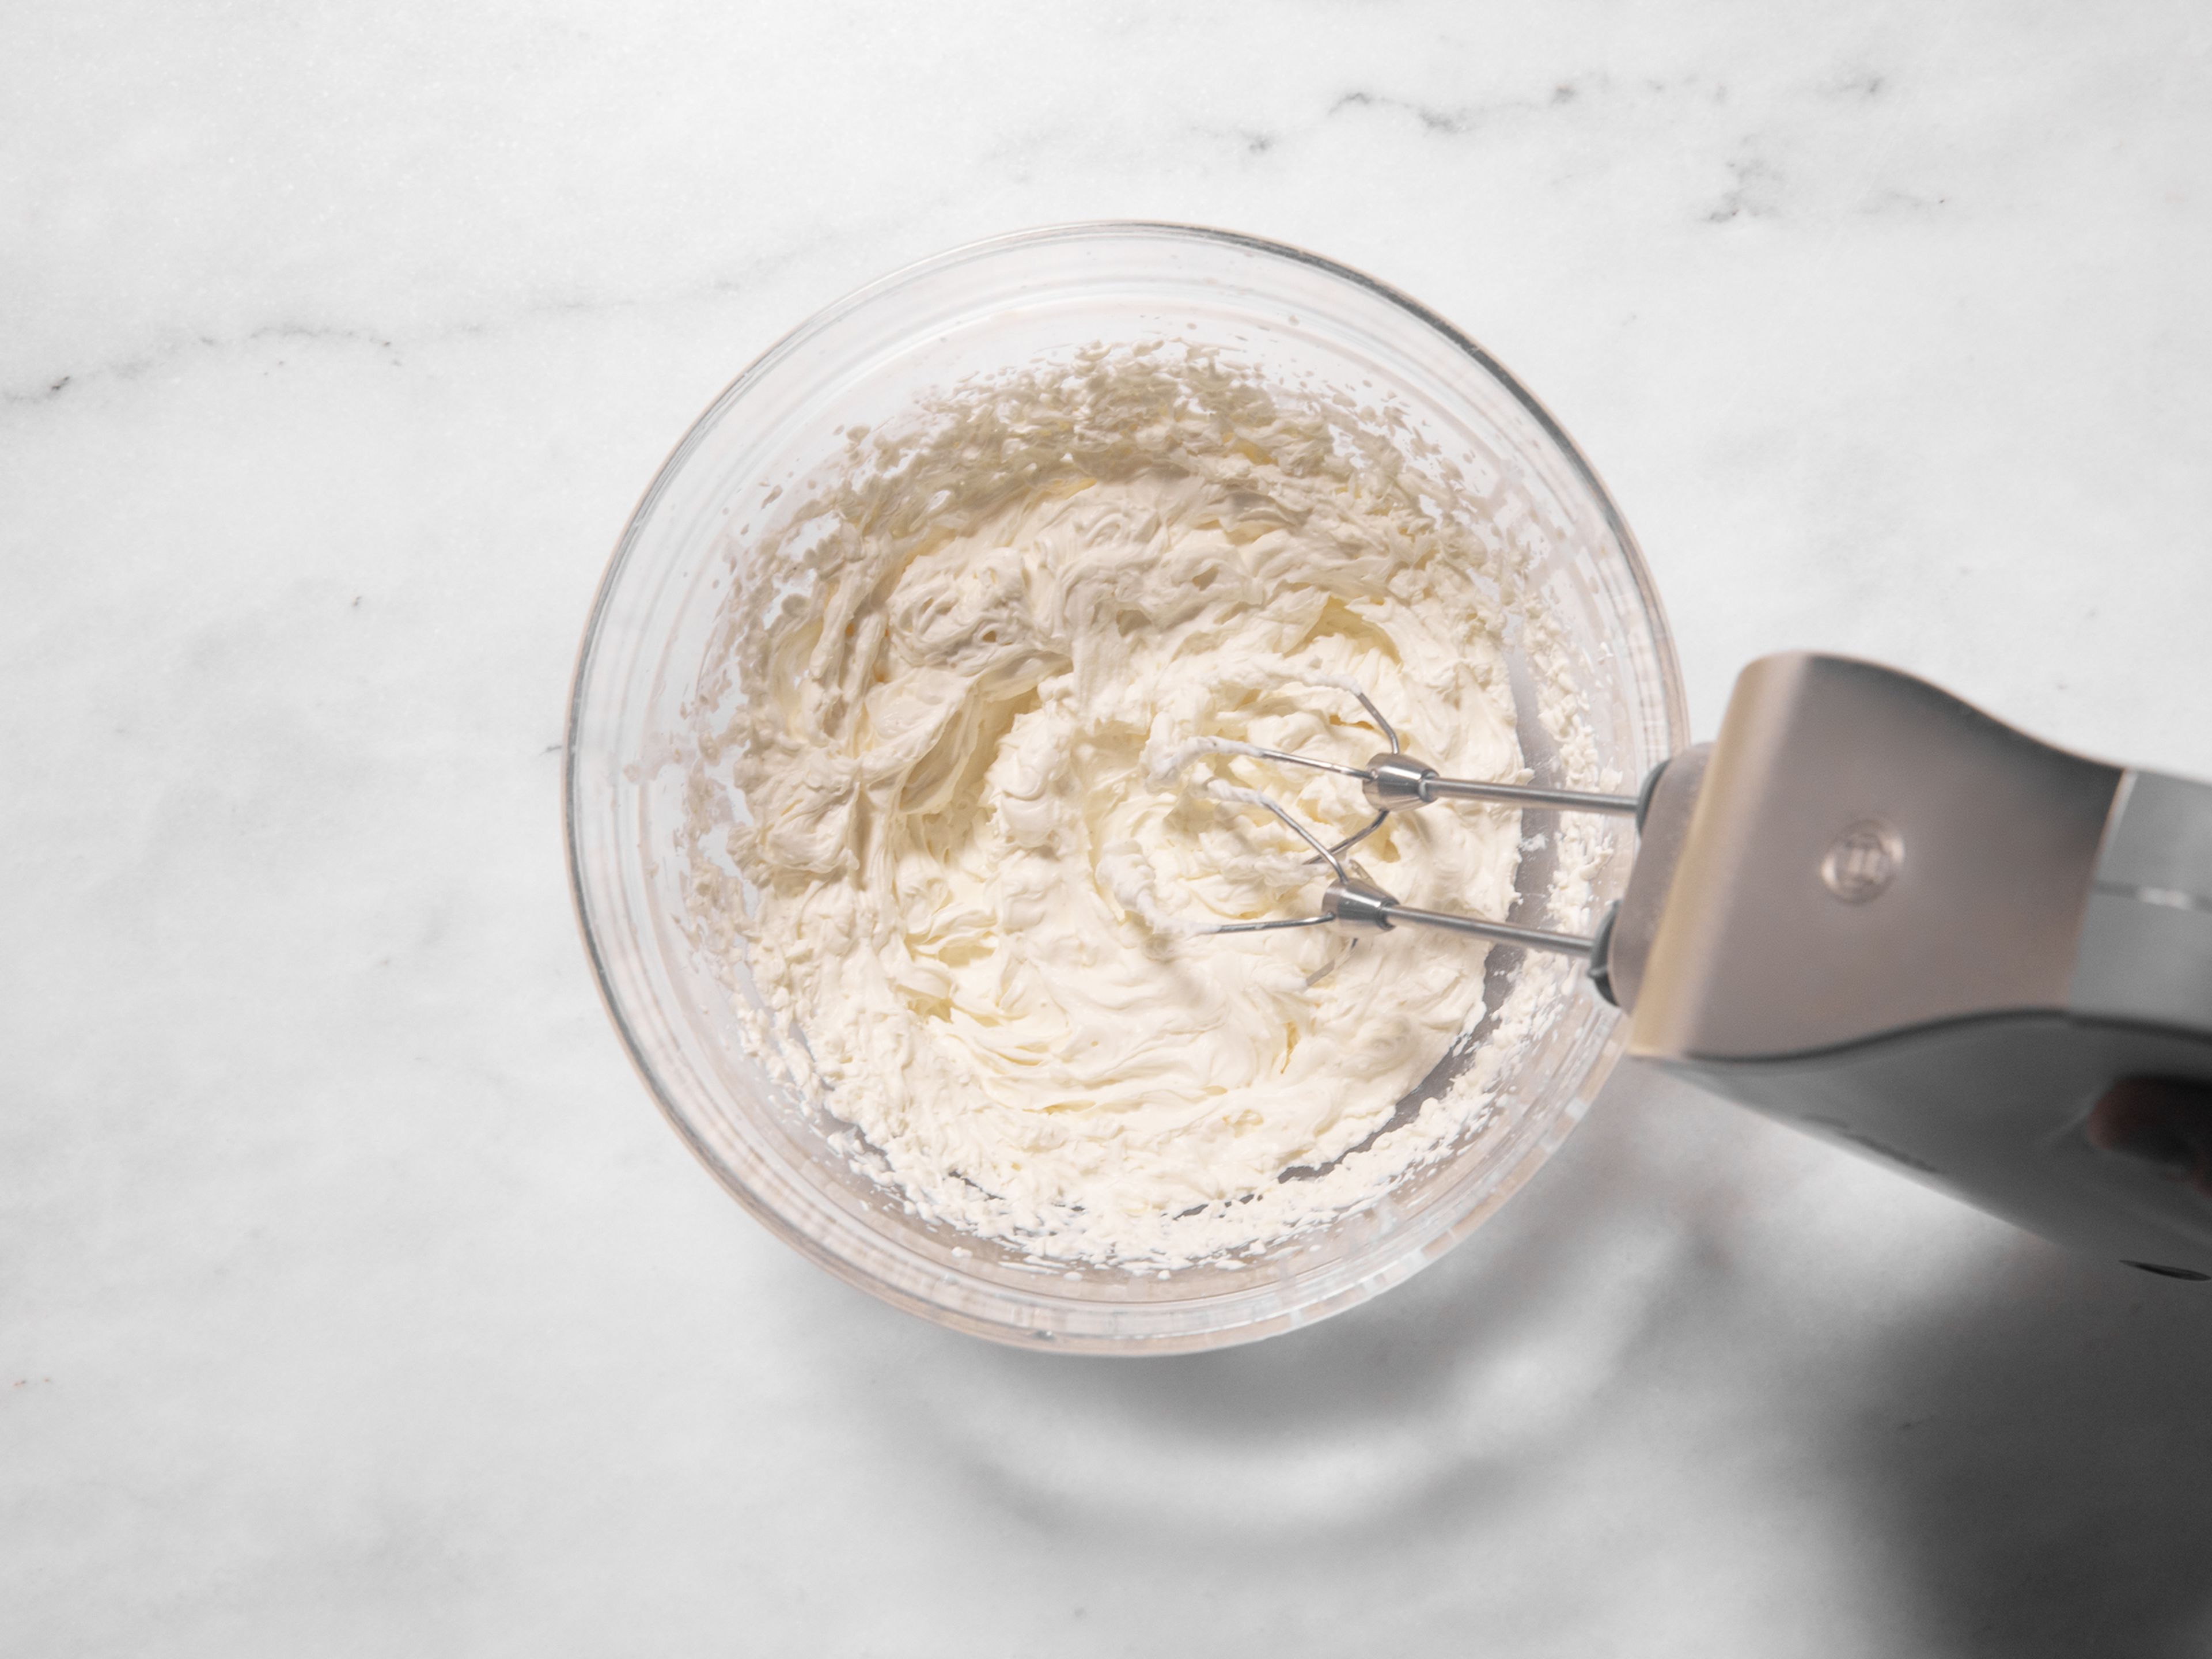 Add mascarpone, heavy cream, vanilla sugar, and half the lemon zest to a large bowl and beat with a hand mixer with beaters until fluffy and light.